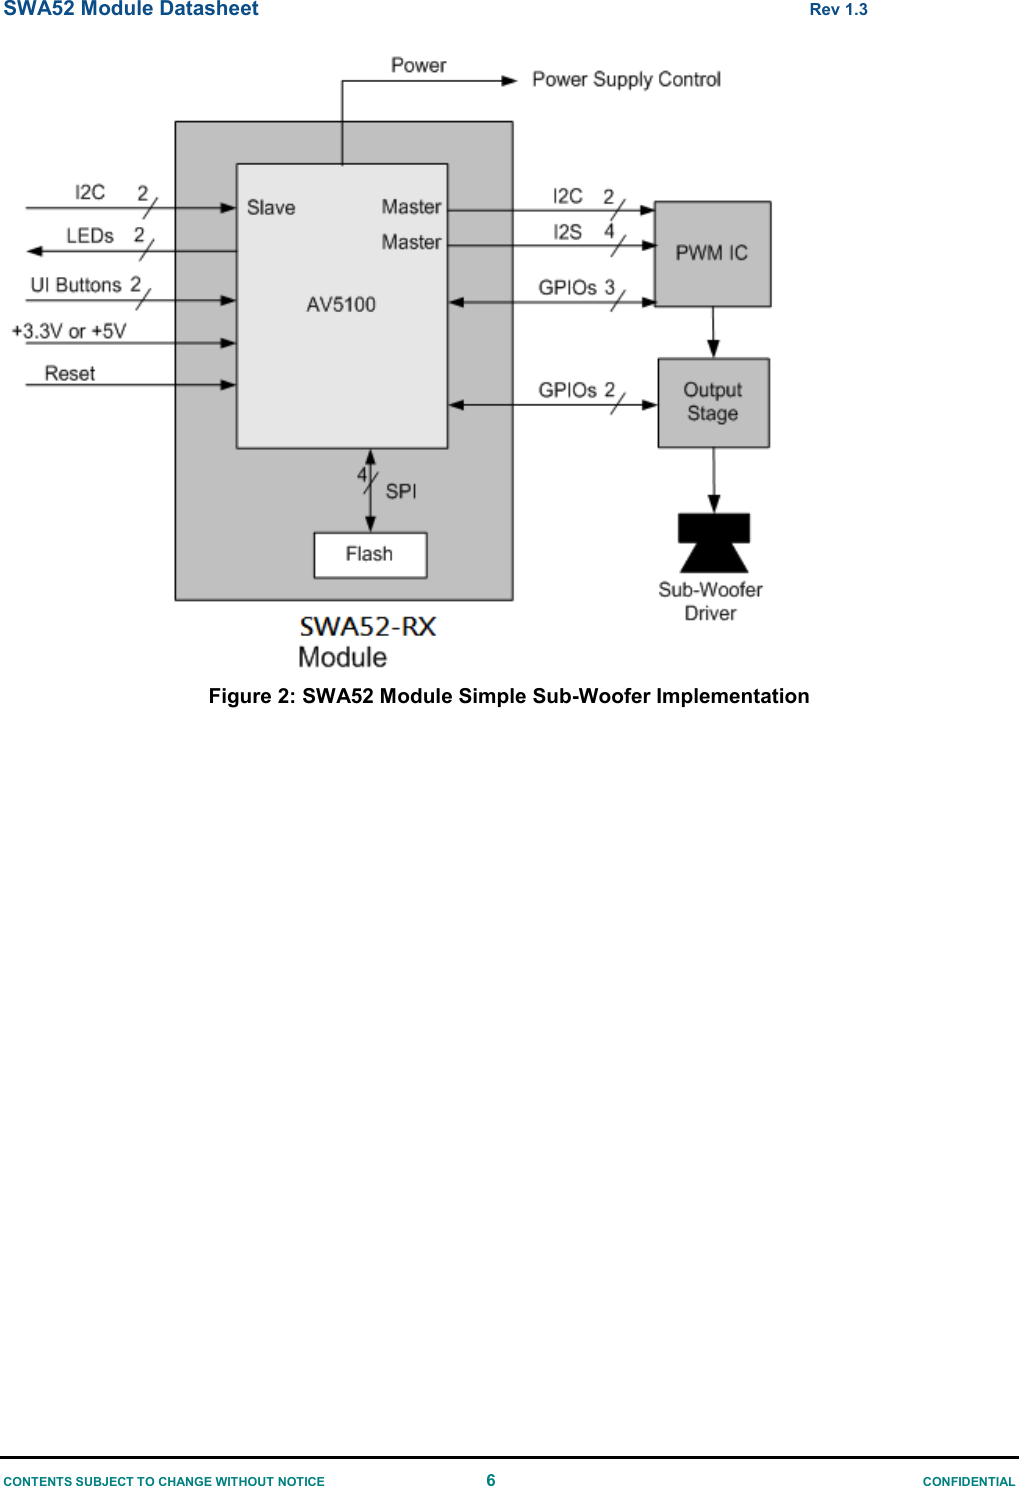 SWA52 Module Datasheet  Rev 1.3 CONTENTS SUBJECT TO CHANGE WITHOUT NOTICE  6  CONFIDENTIAL Figure 2: SWA52 Module Simple Sub-Woofer Implementation               